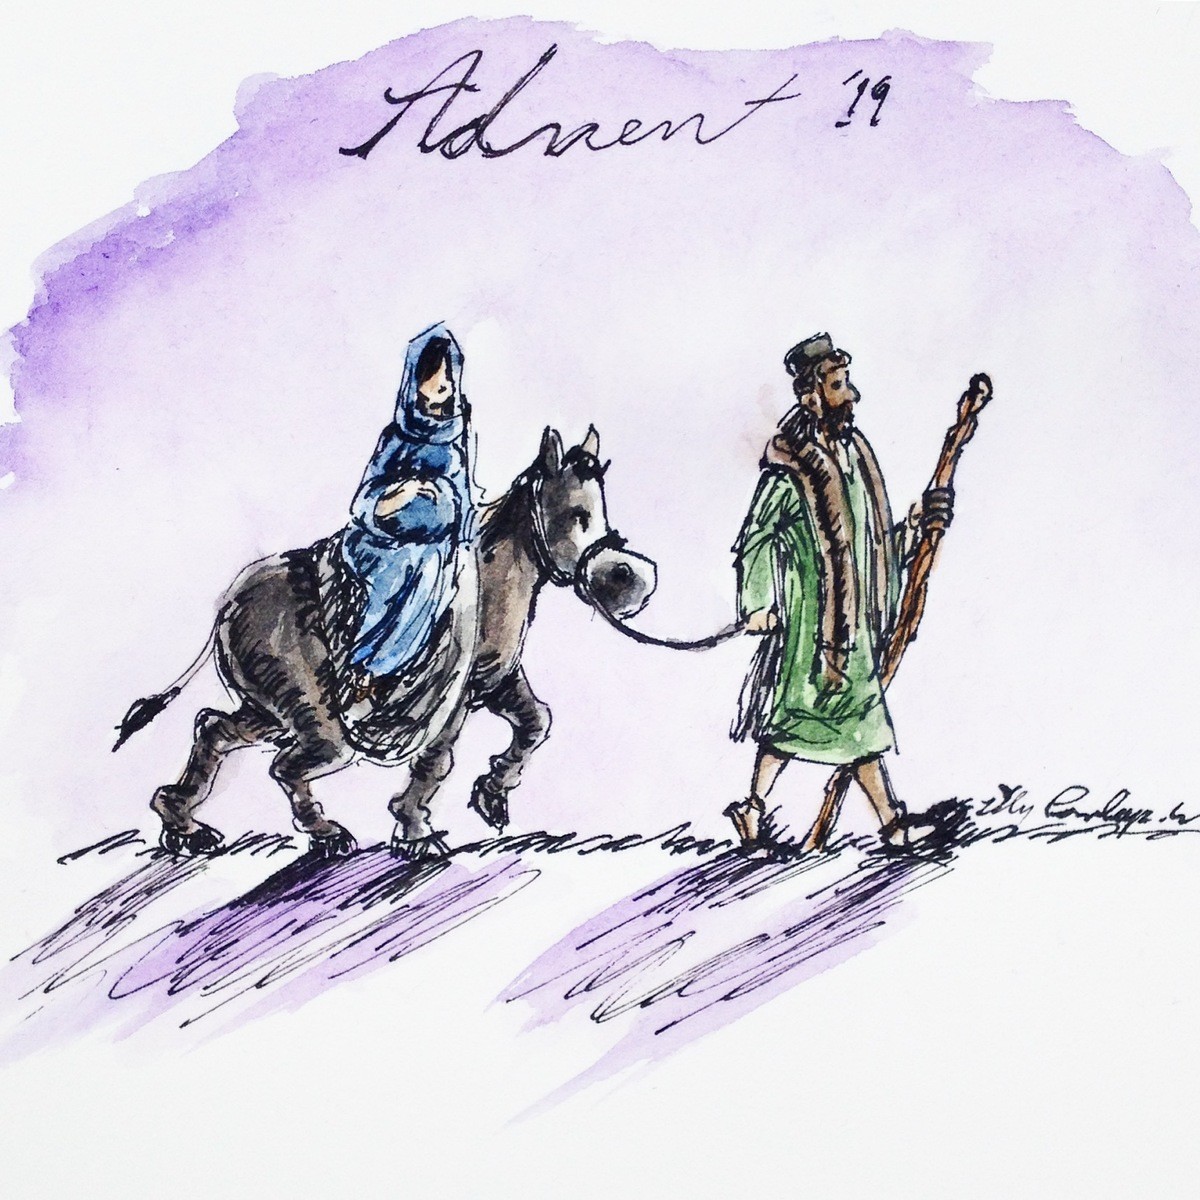 Advent, Mary and Joseph. We're in Advent! We now await the come of the Lord with excitement and trembling. I want to know which you prefer my watercolor? join l